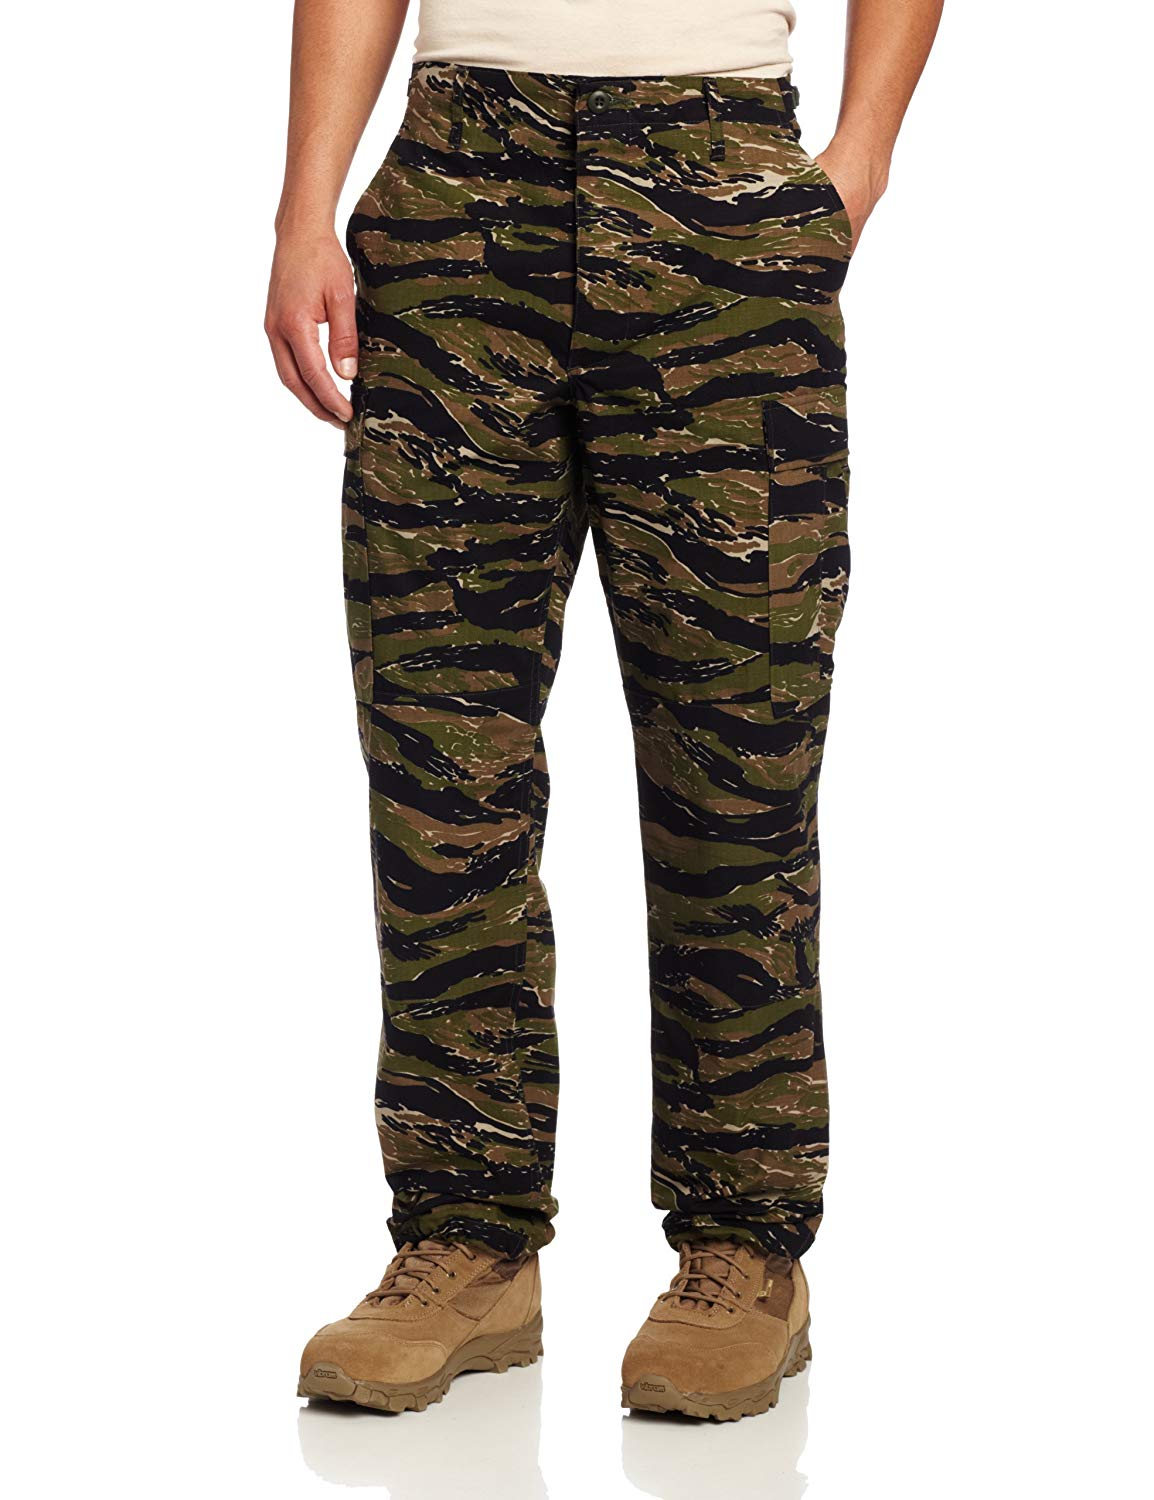 Bulk Quantity Discounts and Deals - Military Wholesale Items – Military ...